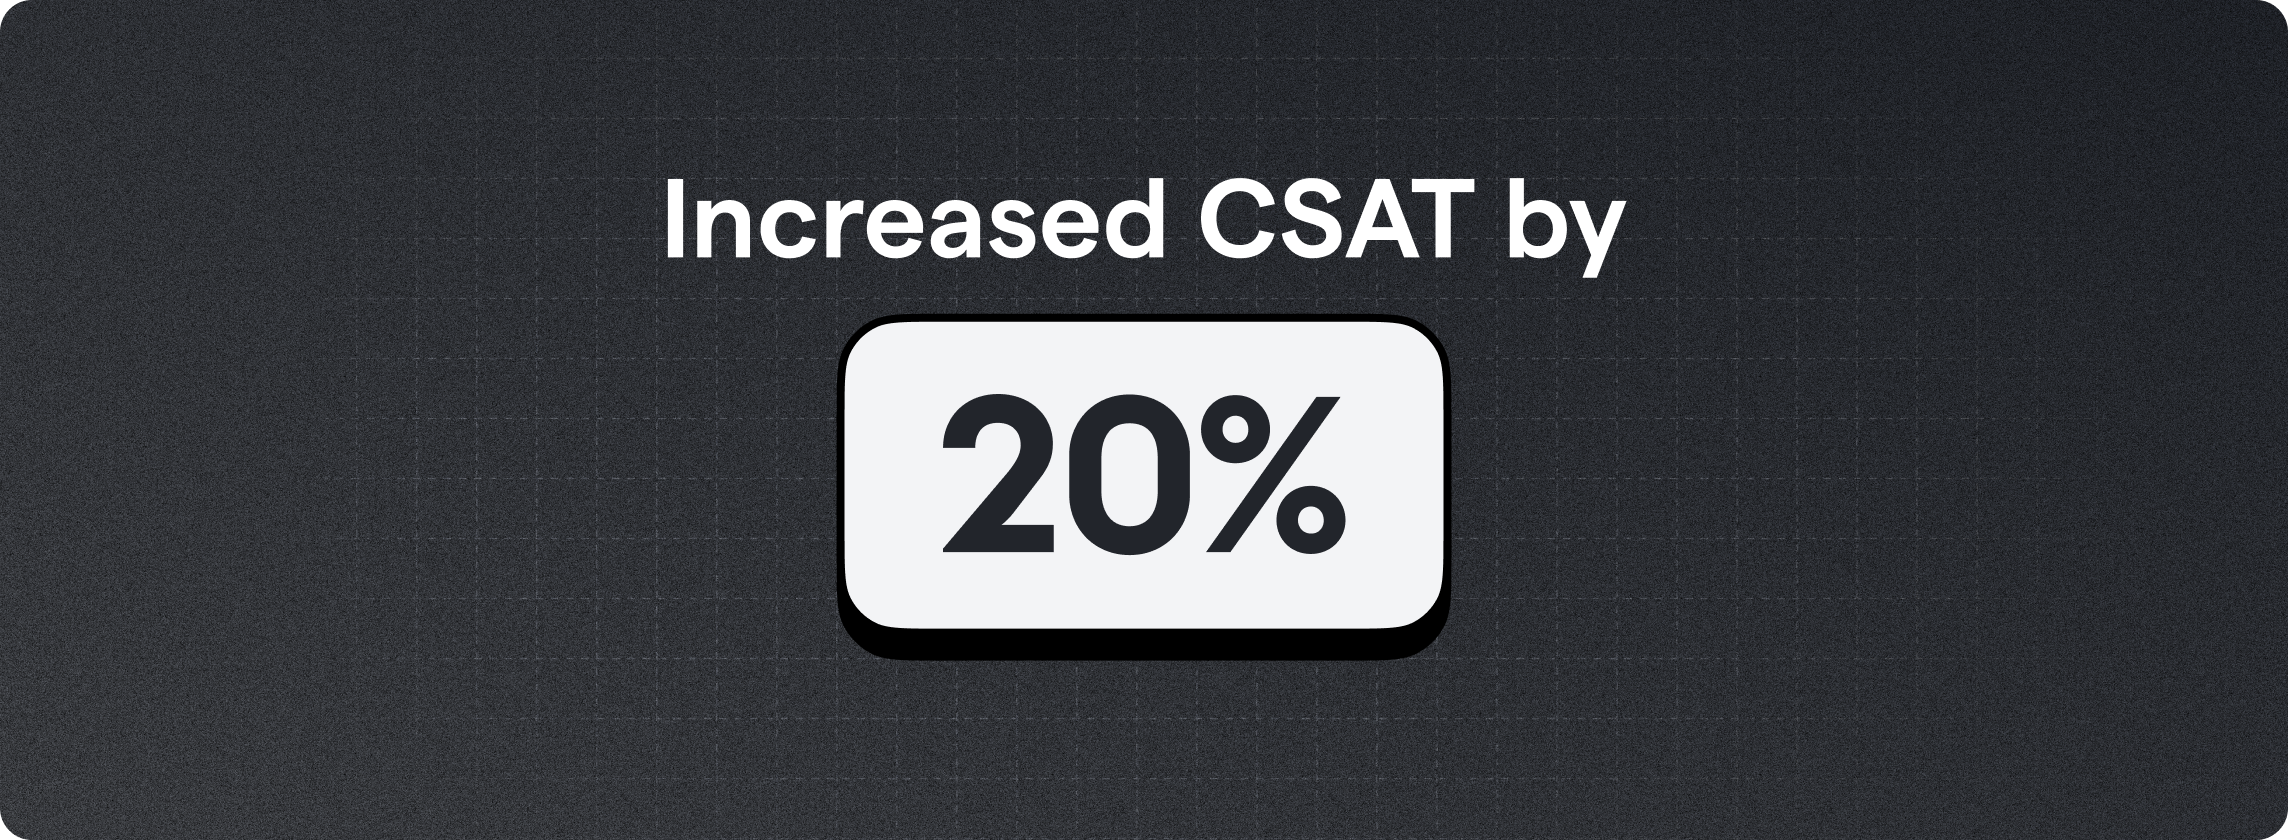 Increased CSAT by 20%